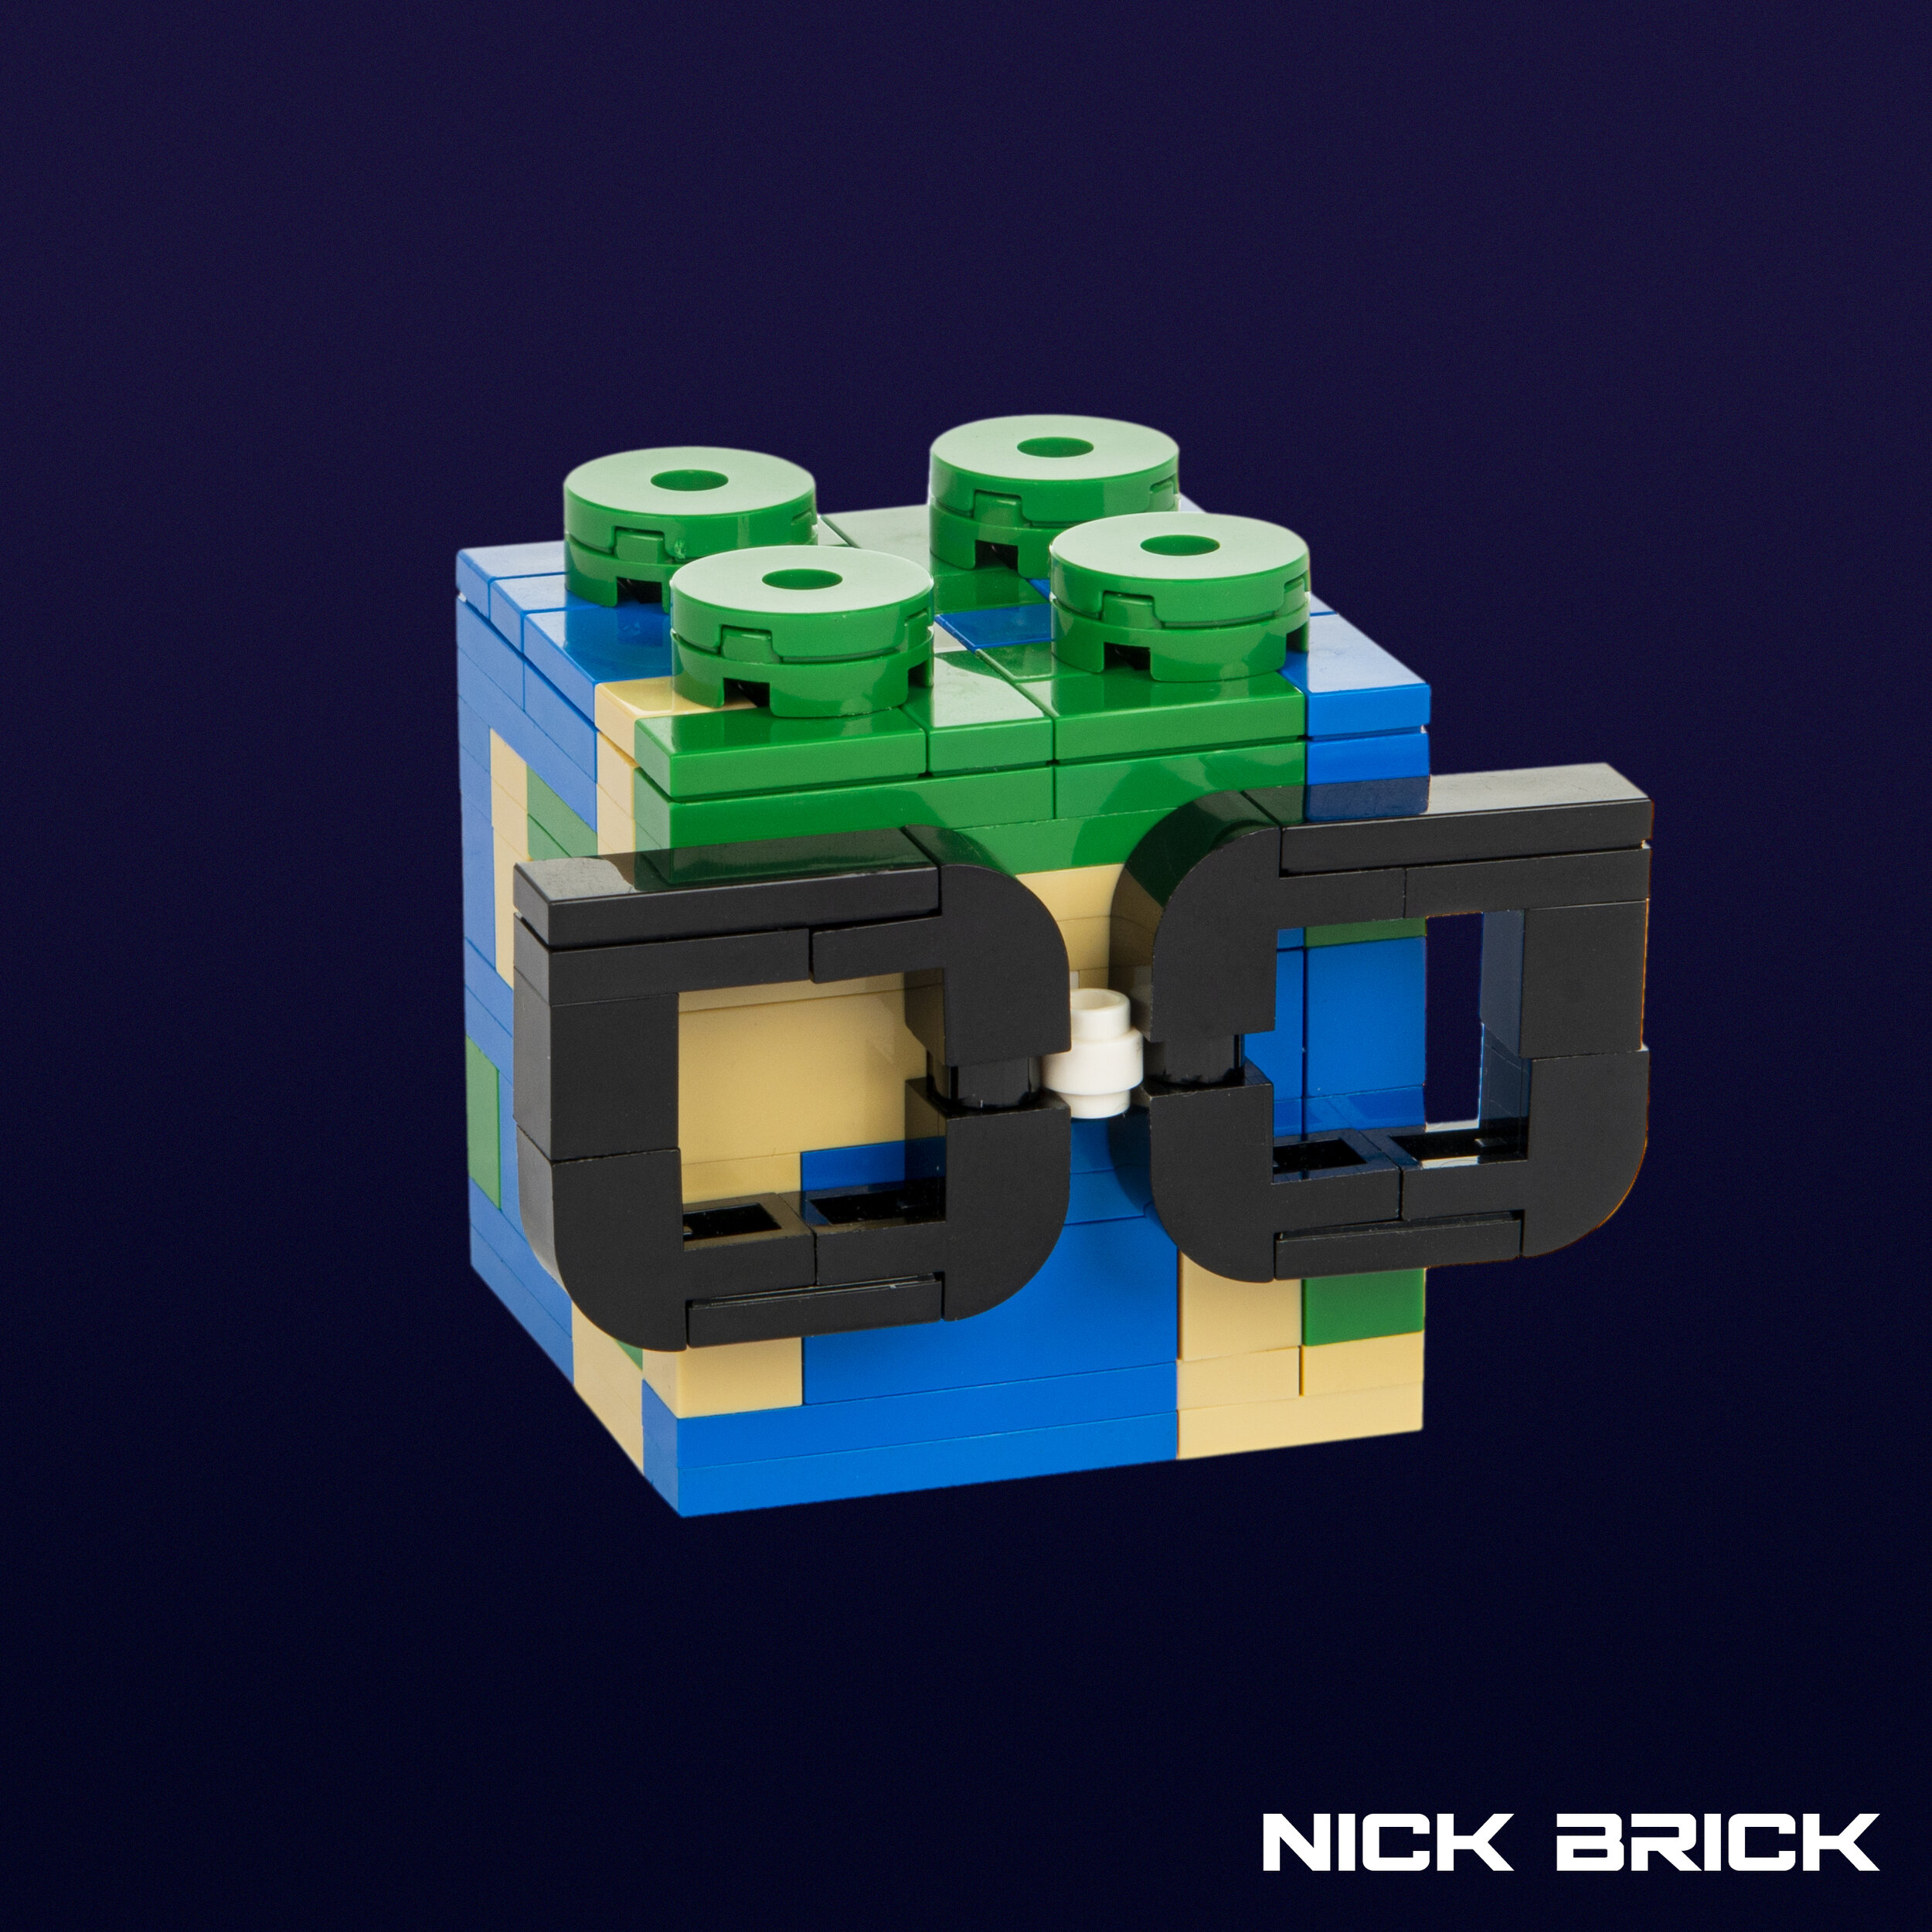 Nick Brick - Earth to Nerdly... Over and Out